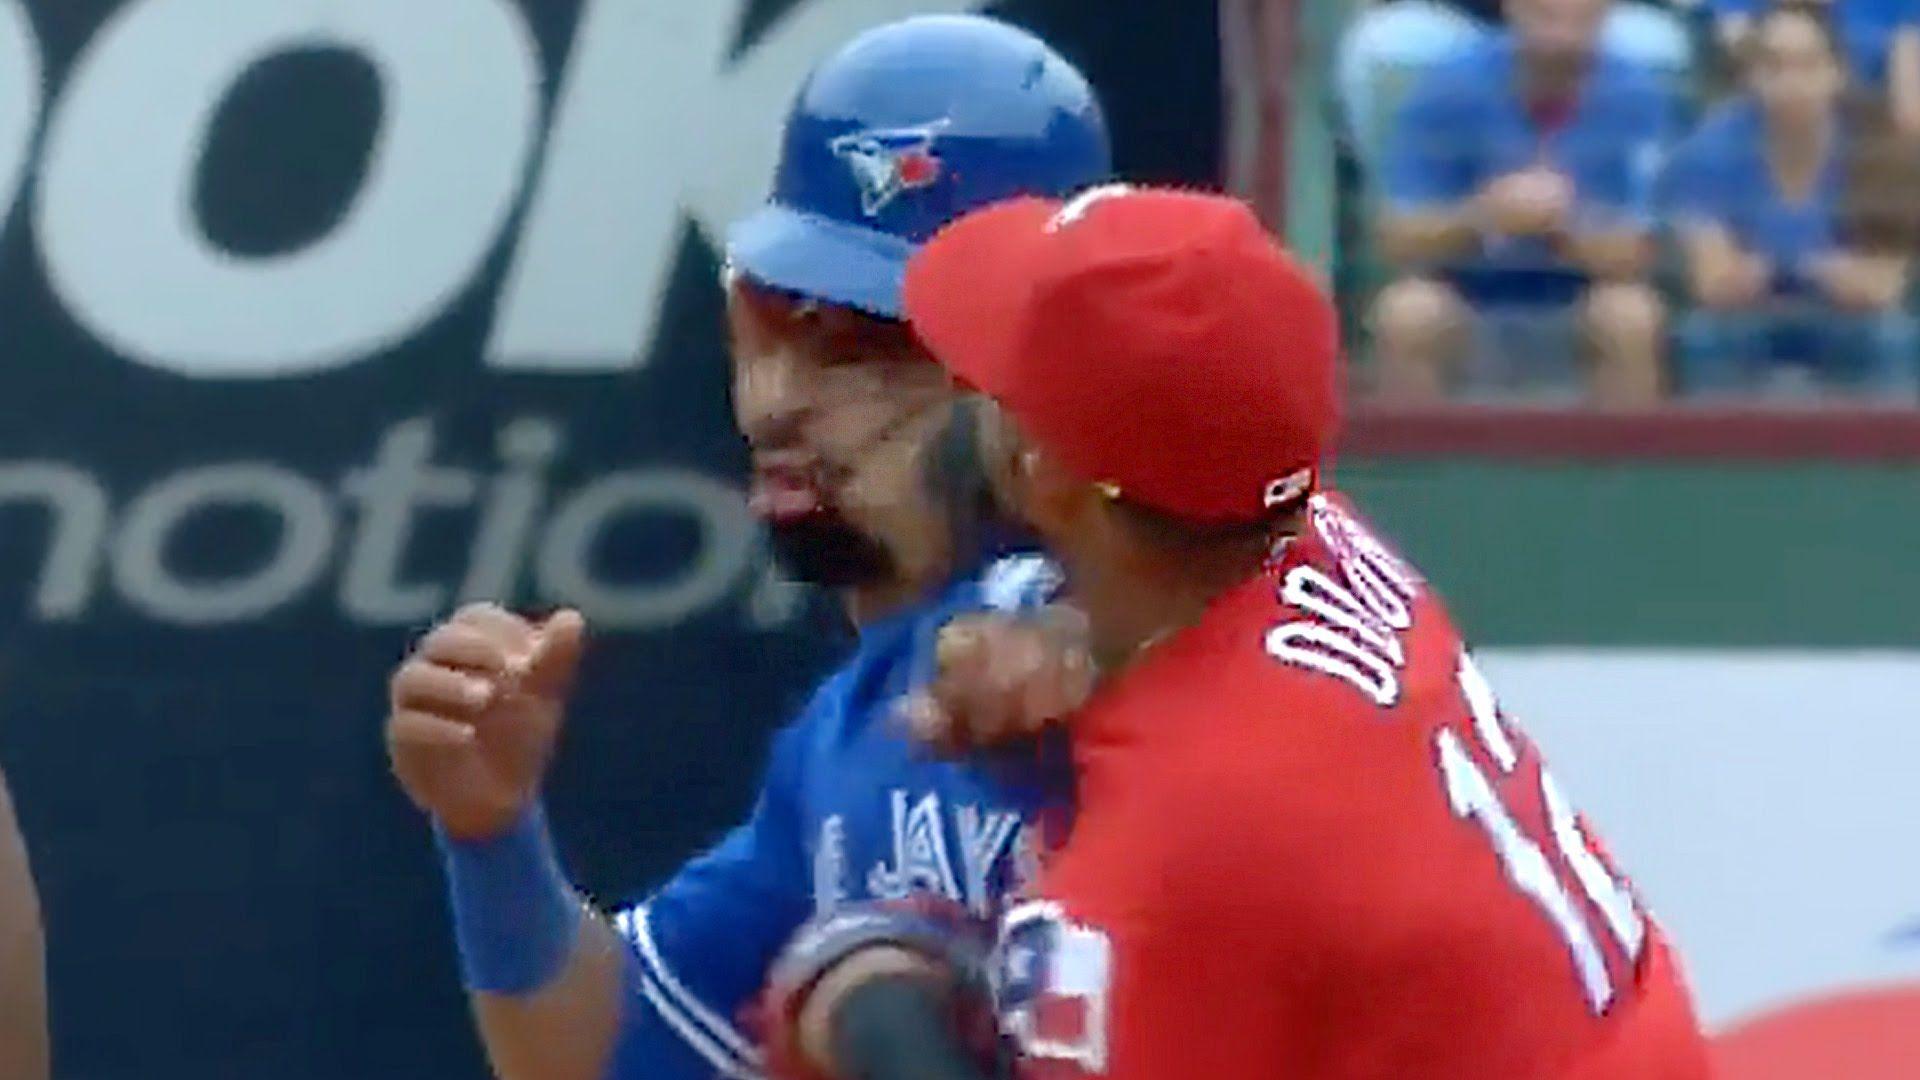 Jose Bautista Gets Punched in Face By Rougned Odor, HUGE Brawl